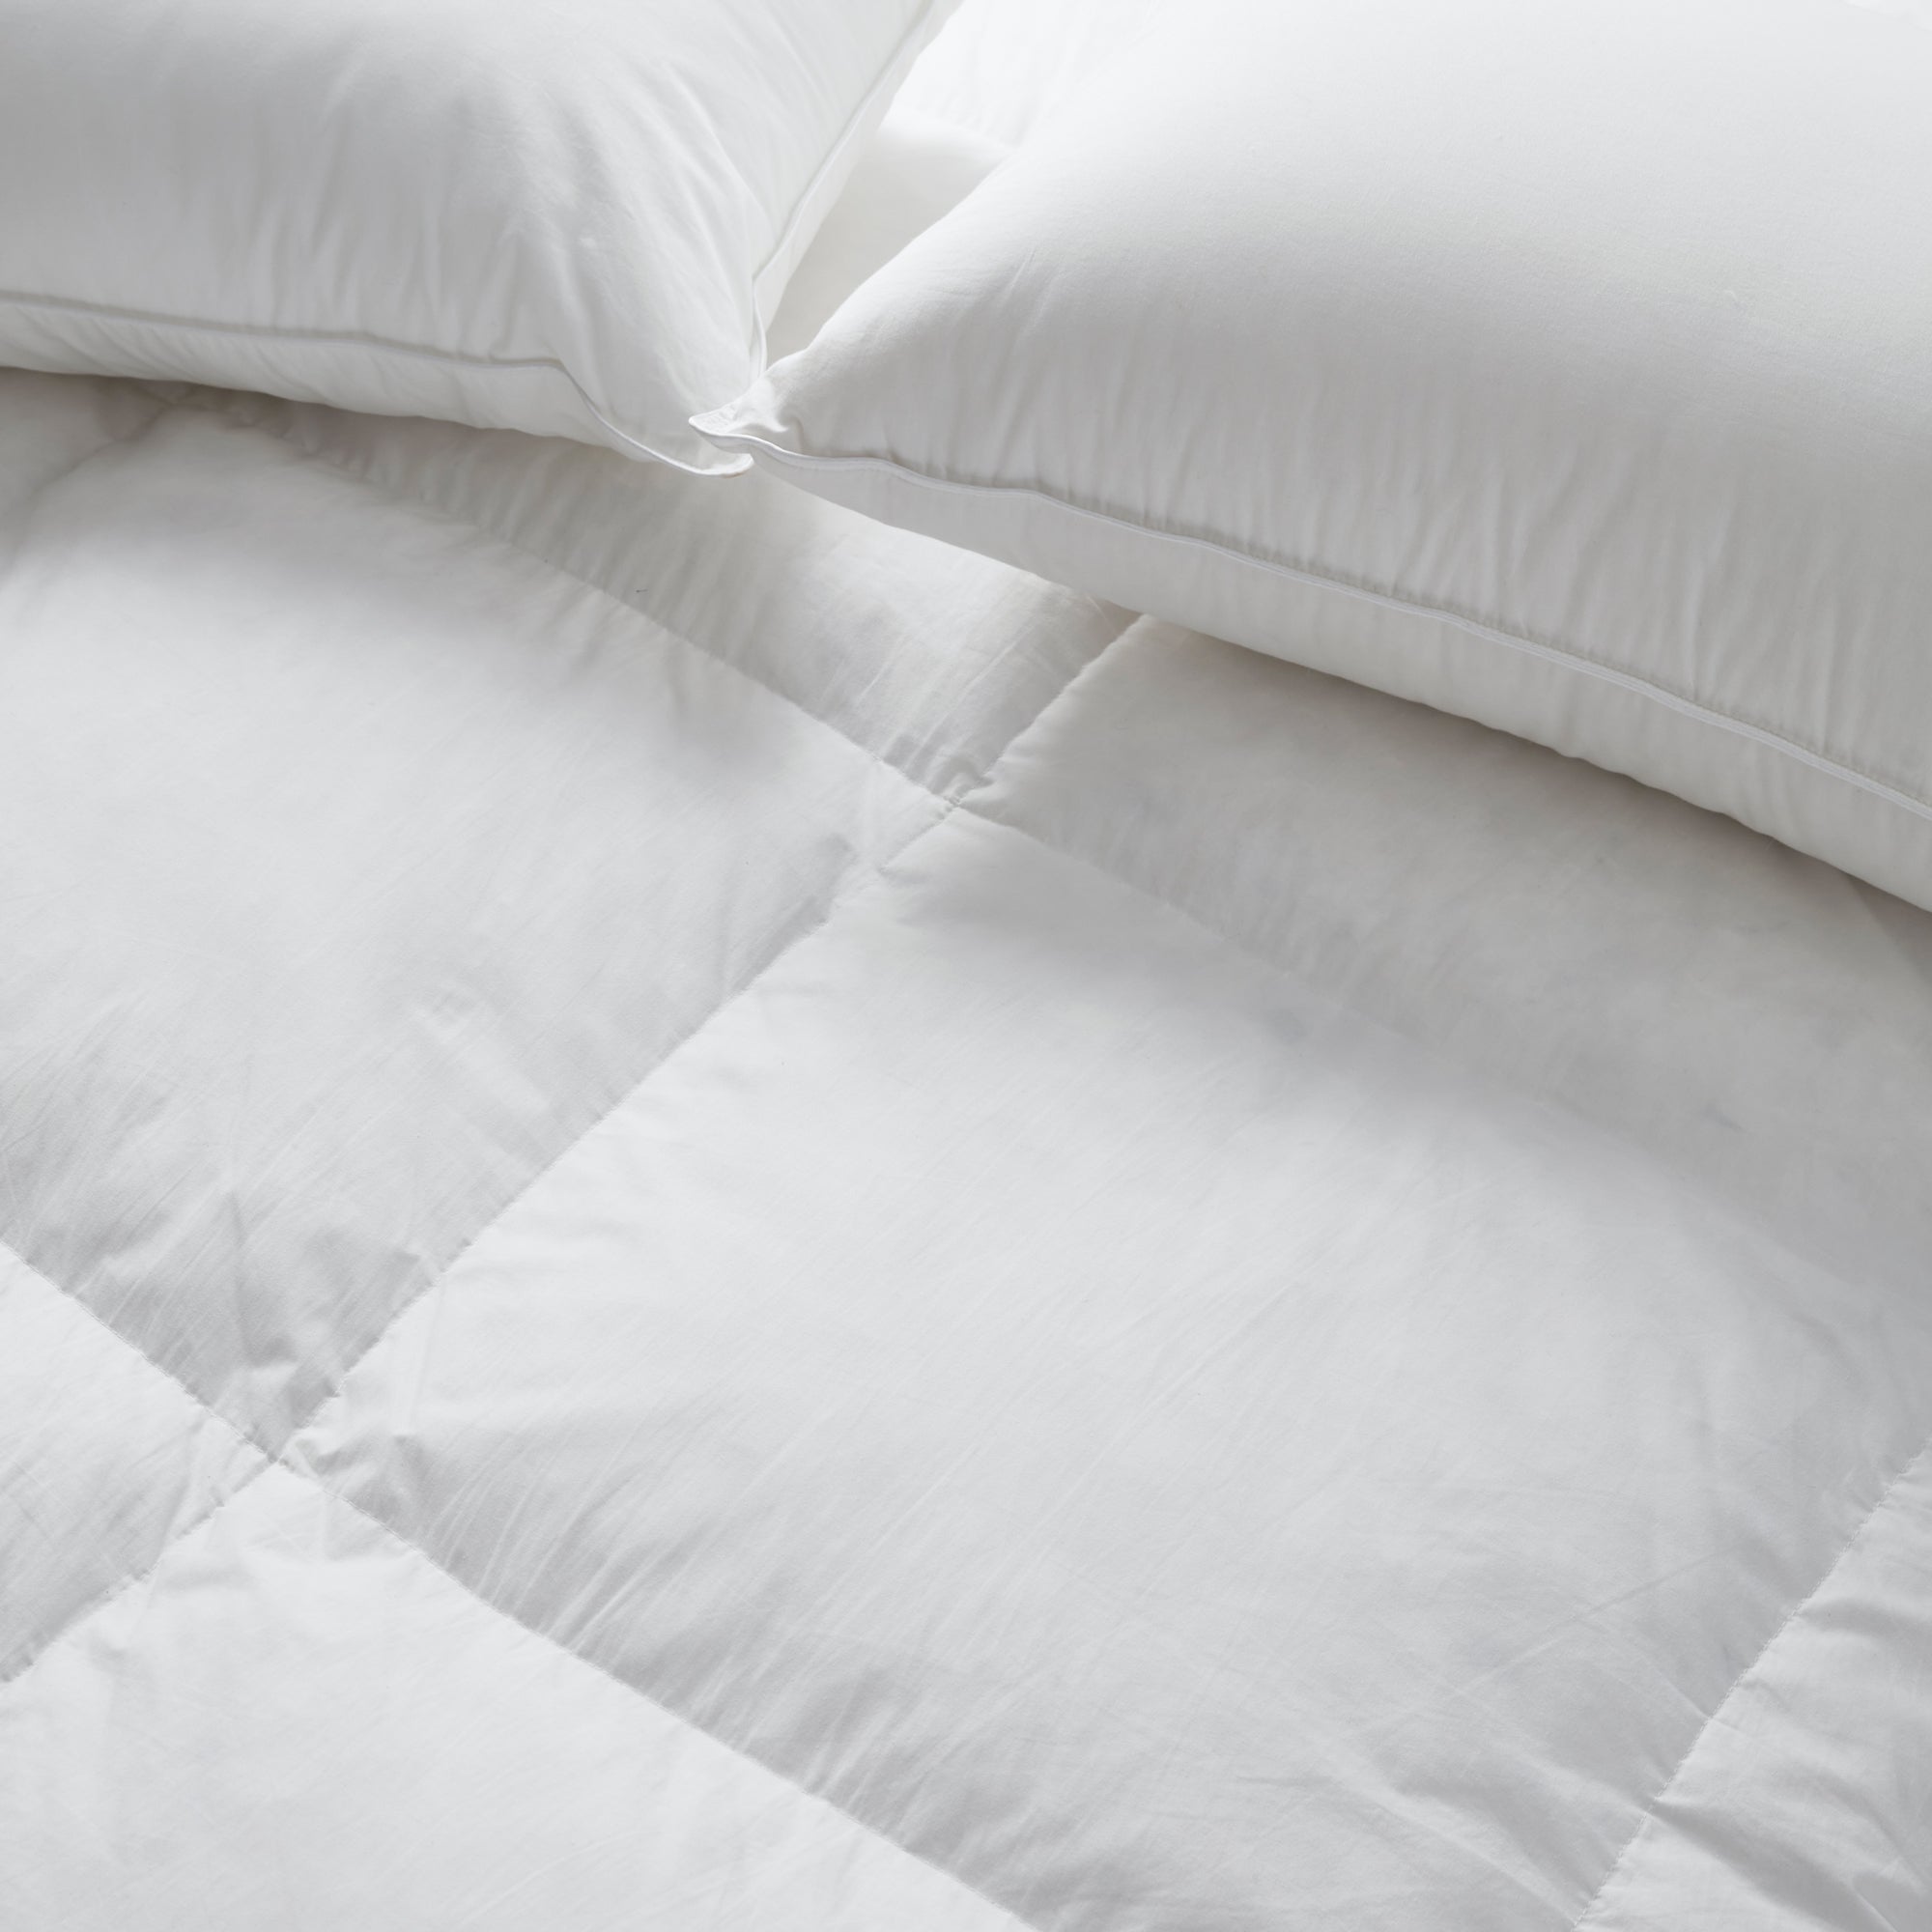 The Feather & Down Mattress Topper